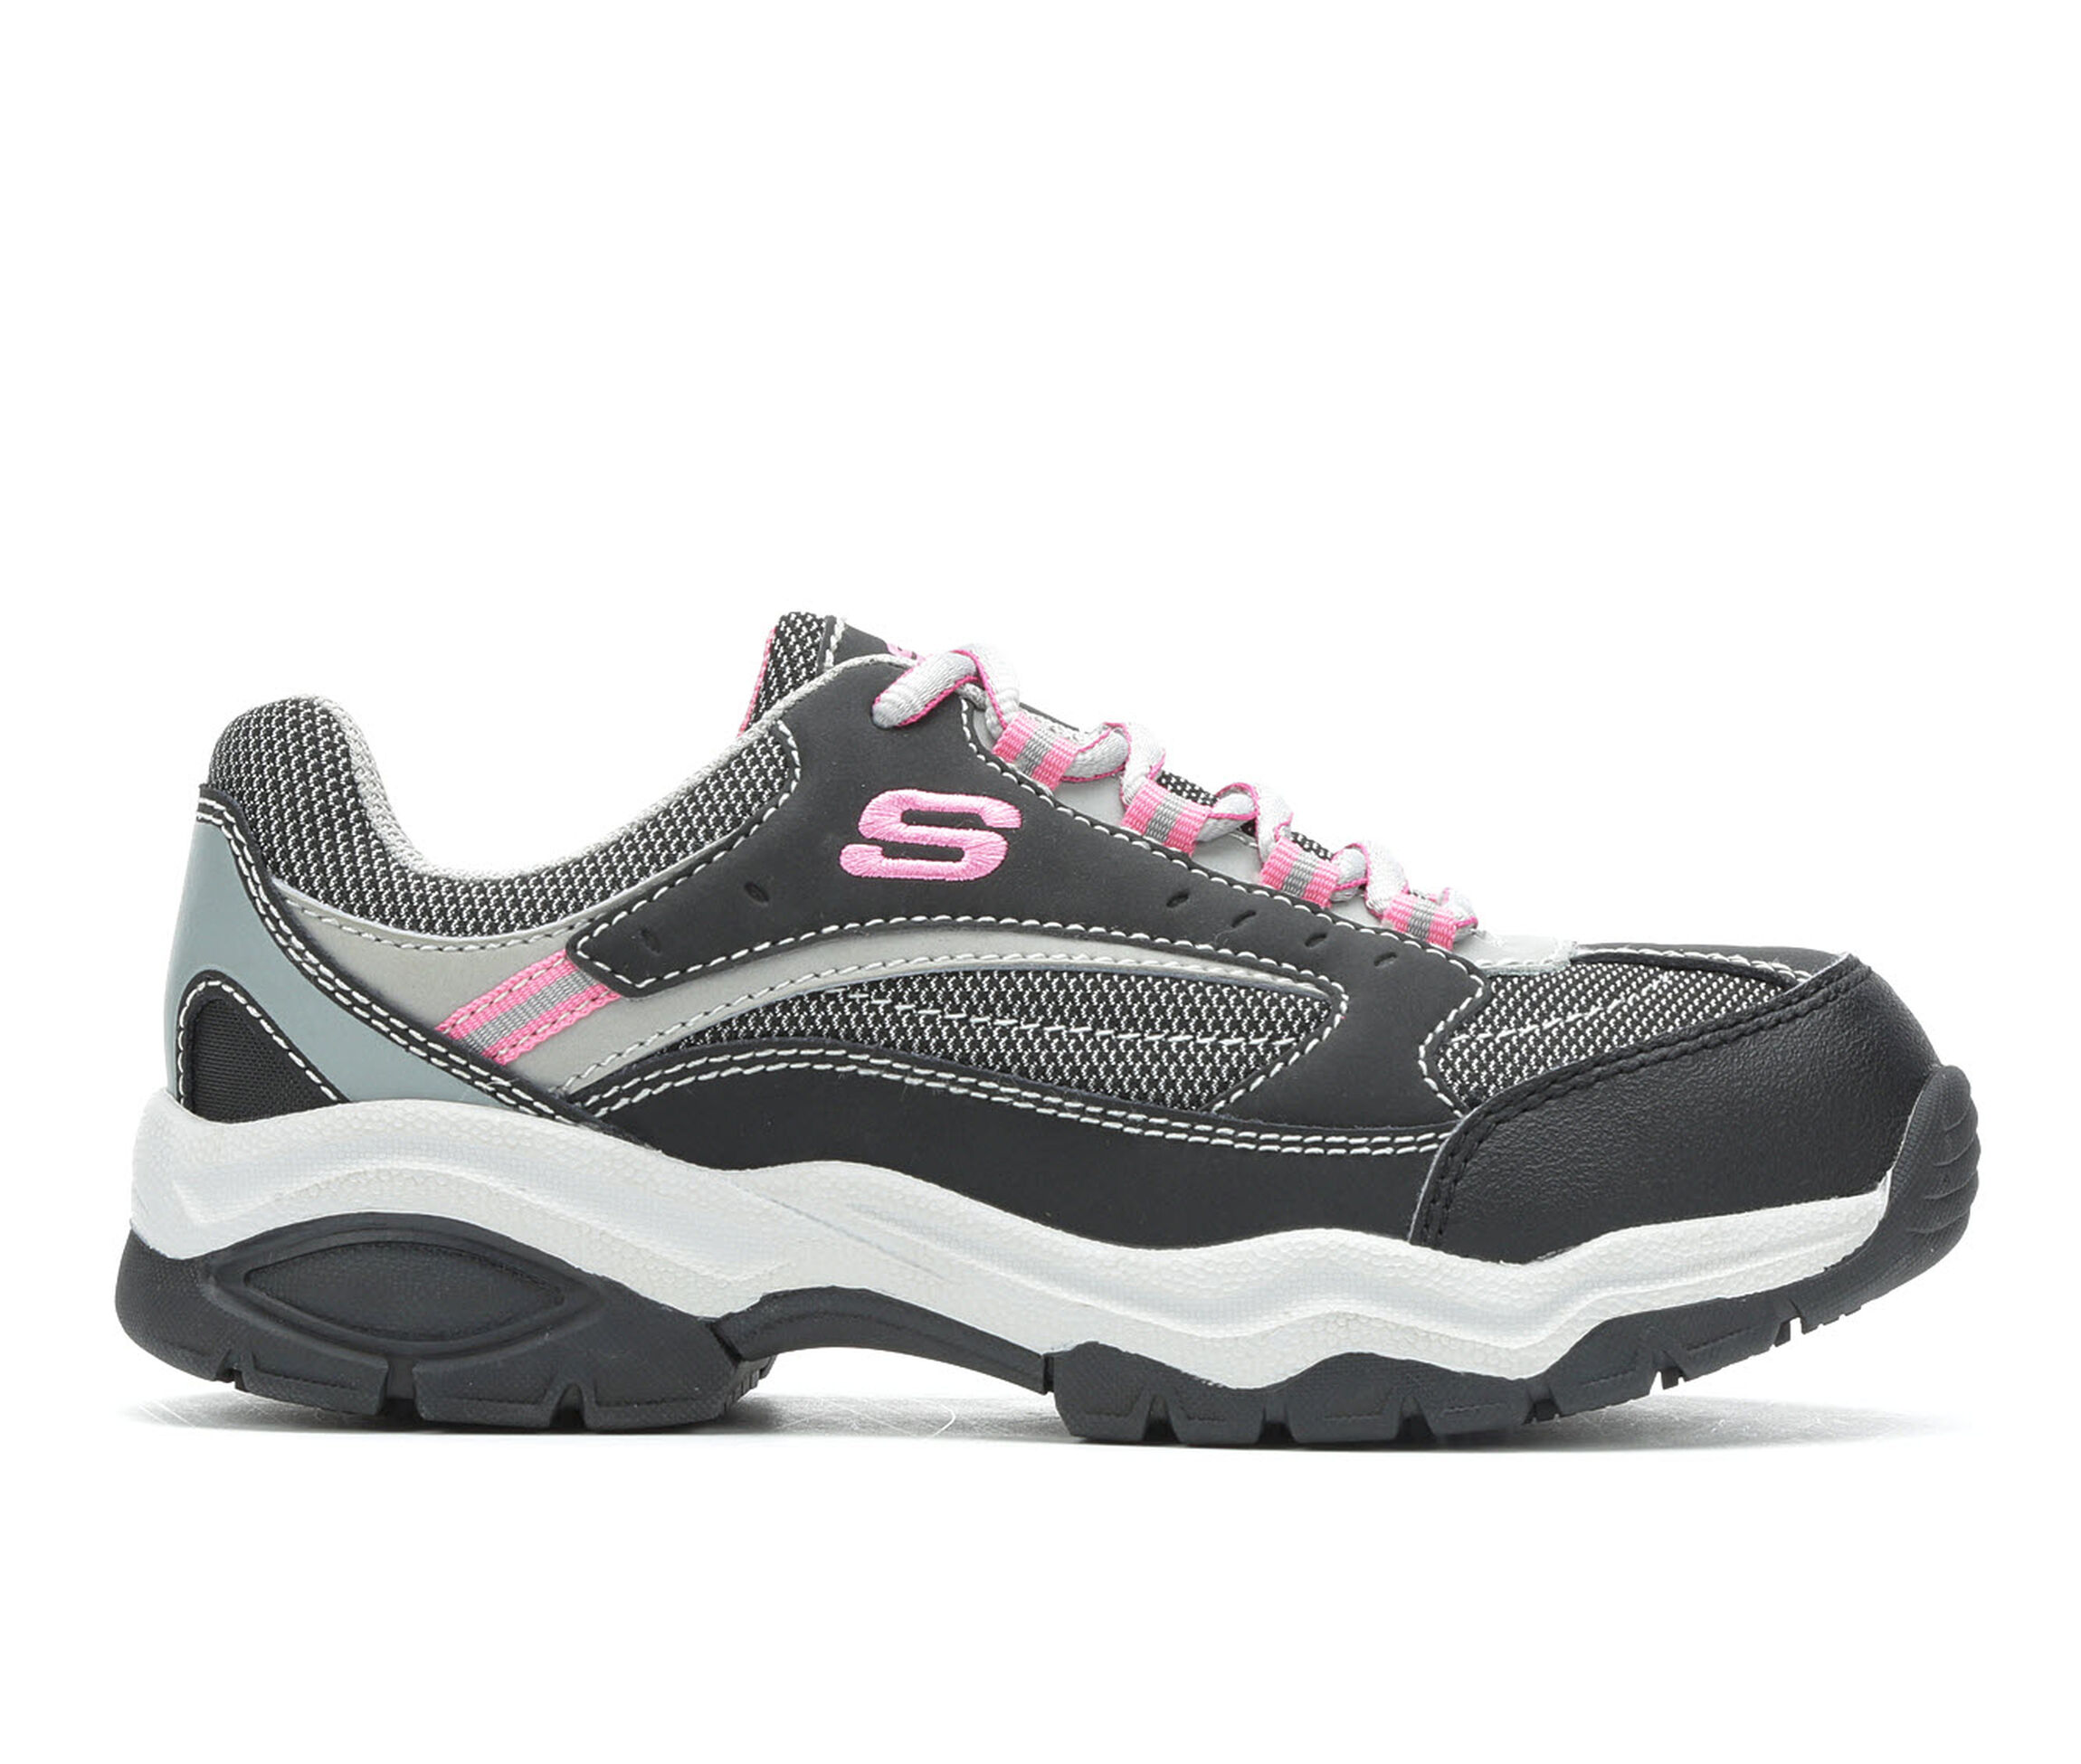 where to buy skechers steel toe shoes